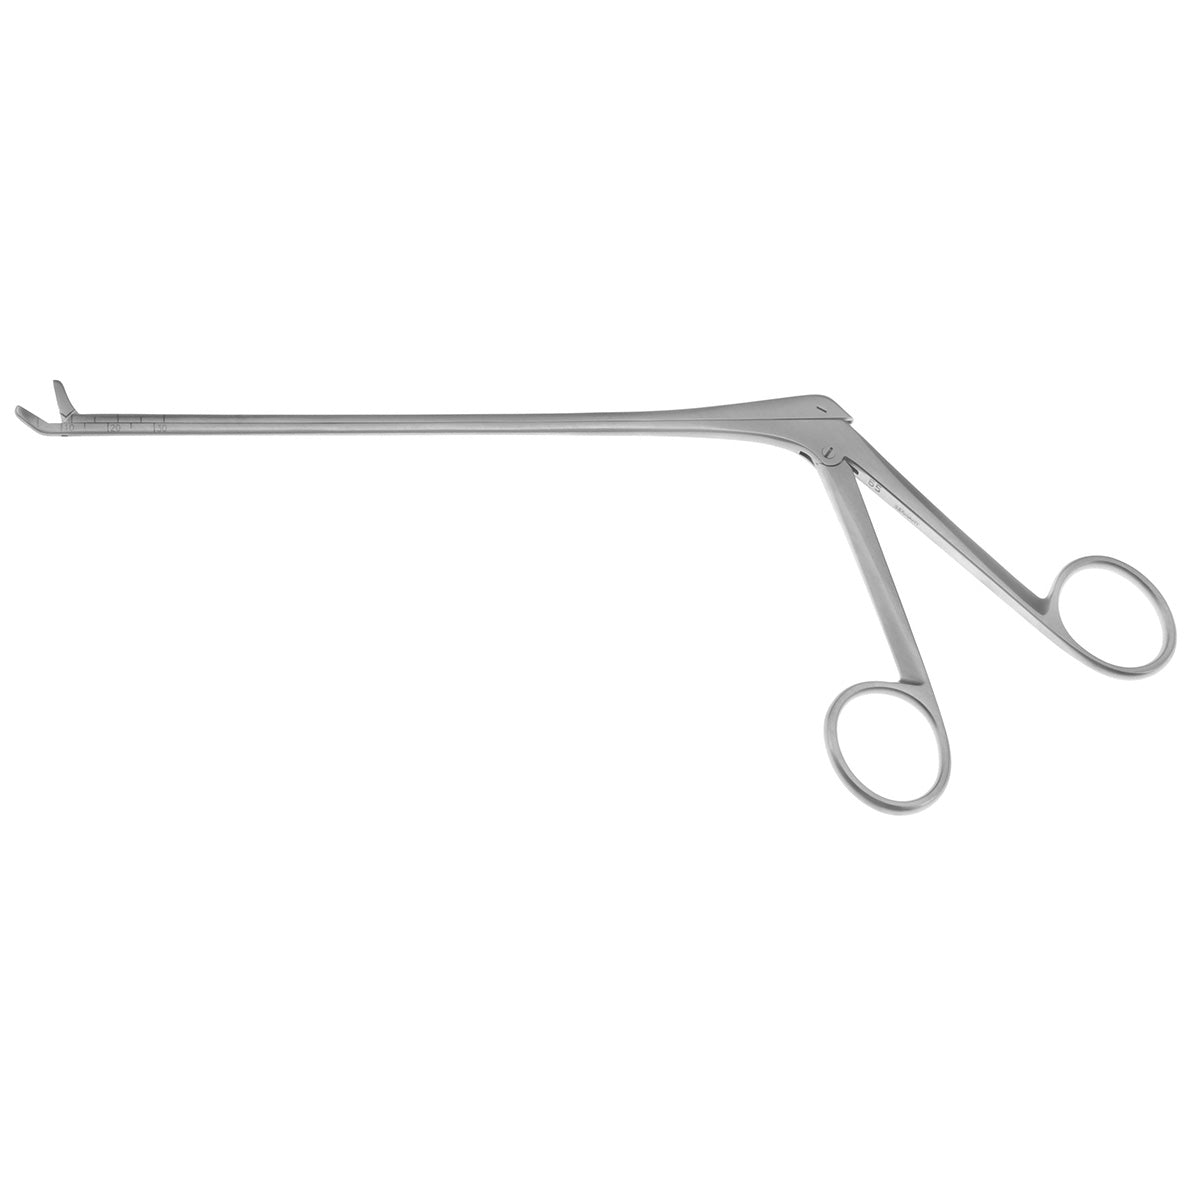 MIS Pituitary Rongeur, upbite, graduated 2mm jaw, 7 1/4&#8243;